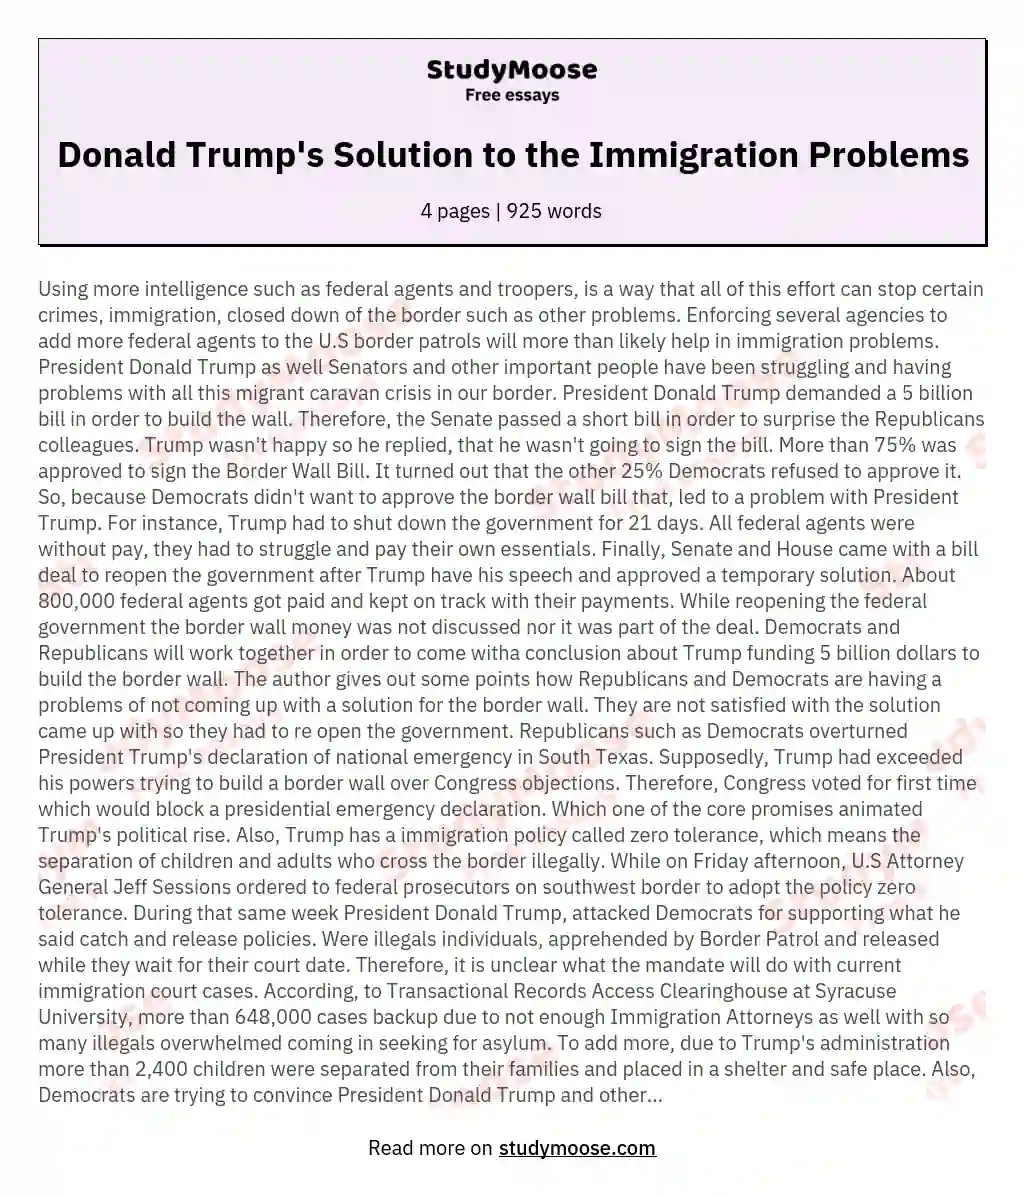 Donald Trump's Solution to the Immigration Problems